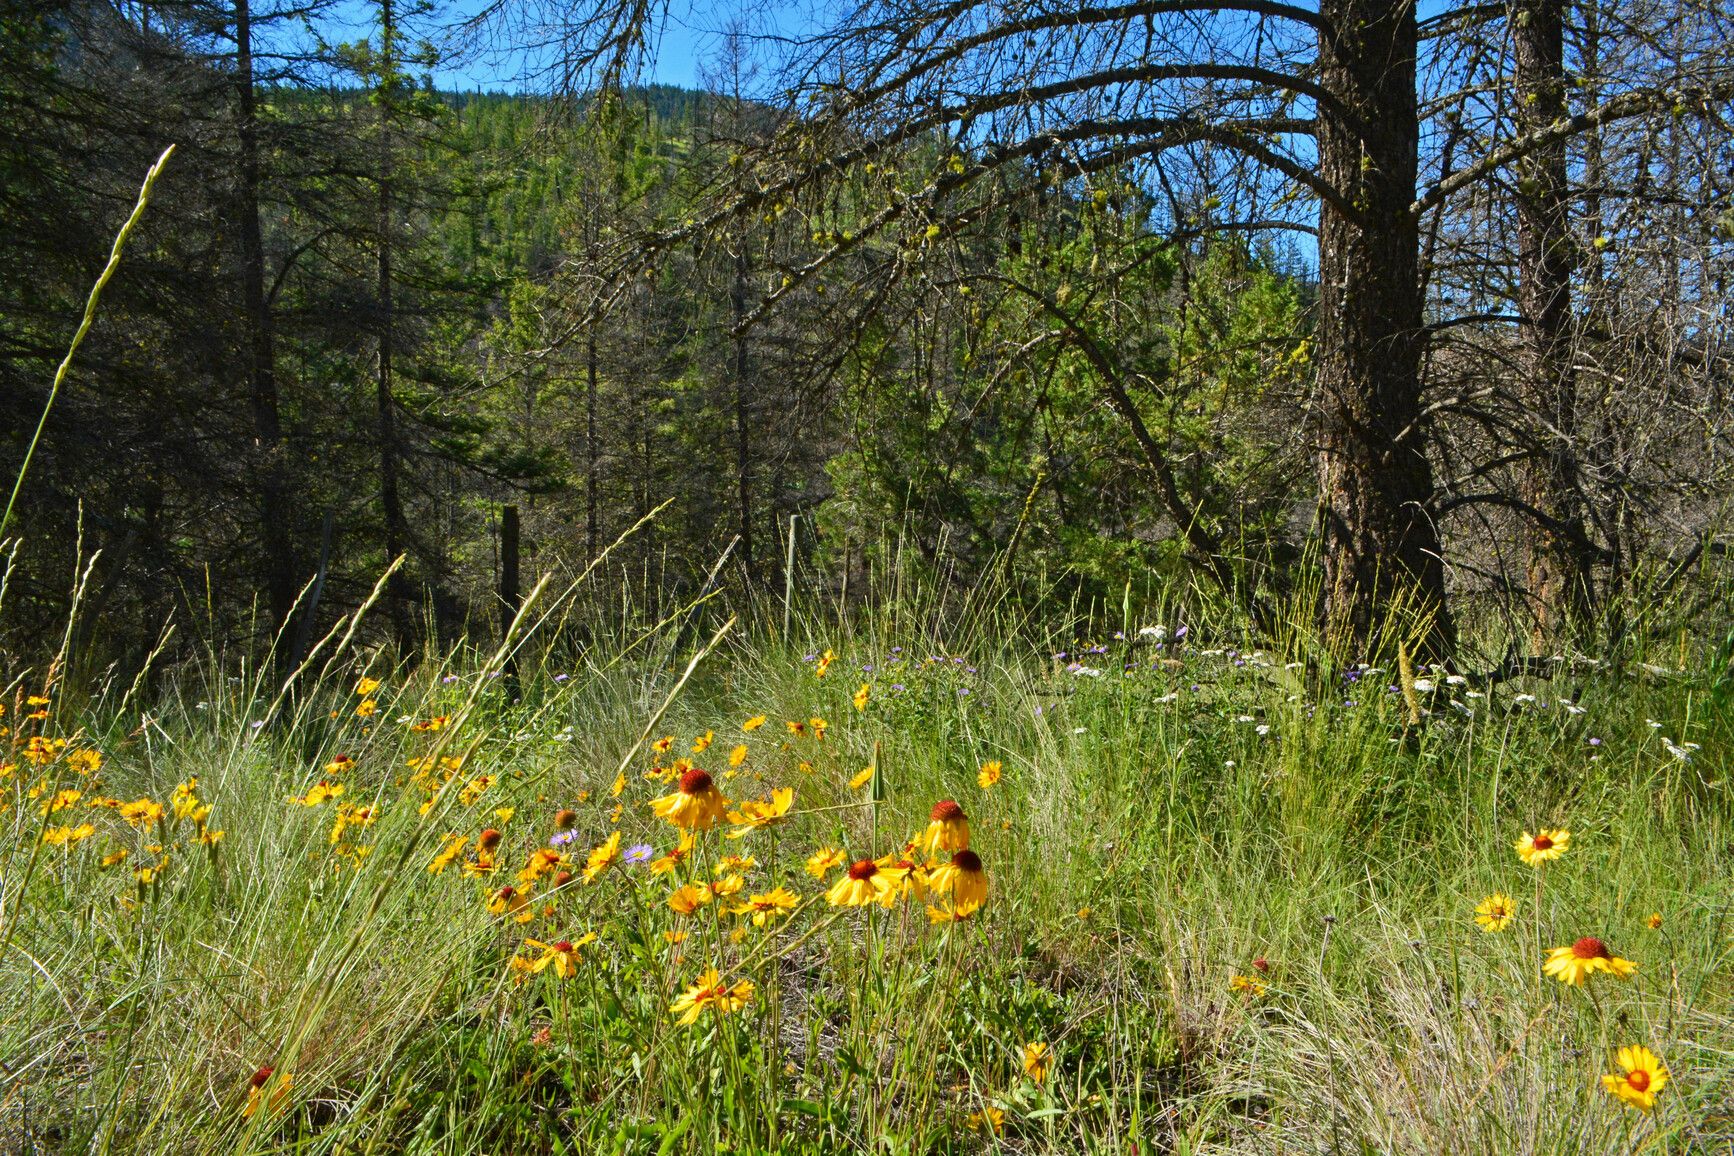 A meadow with grasses and wildflowers in Arrowstone Park.